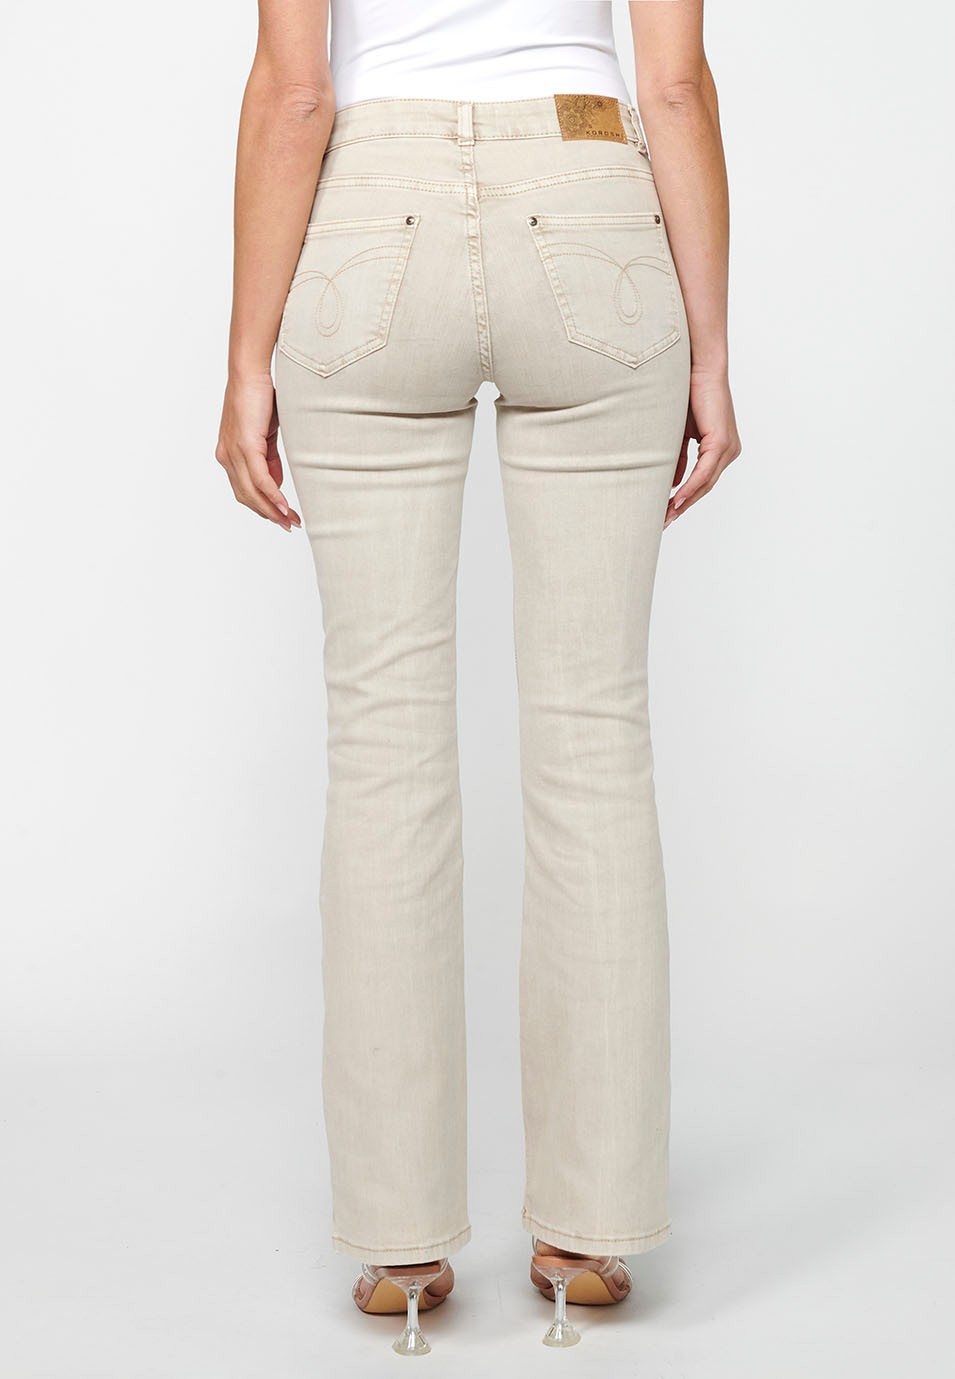 Long bell bottom pants with front zipper closure in Beige for Women 4